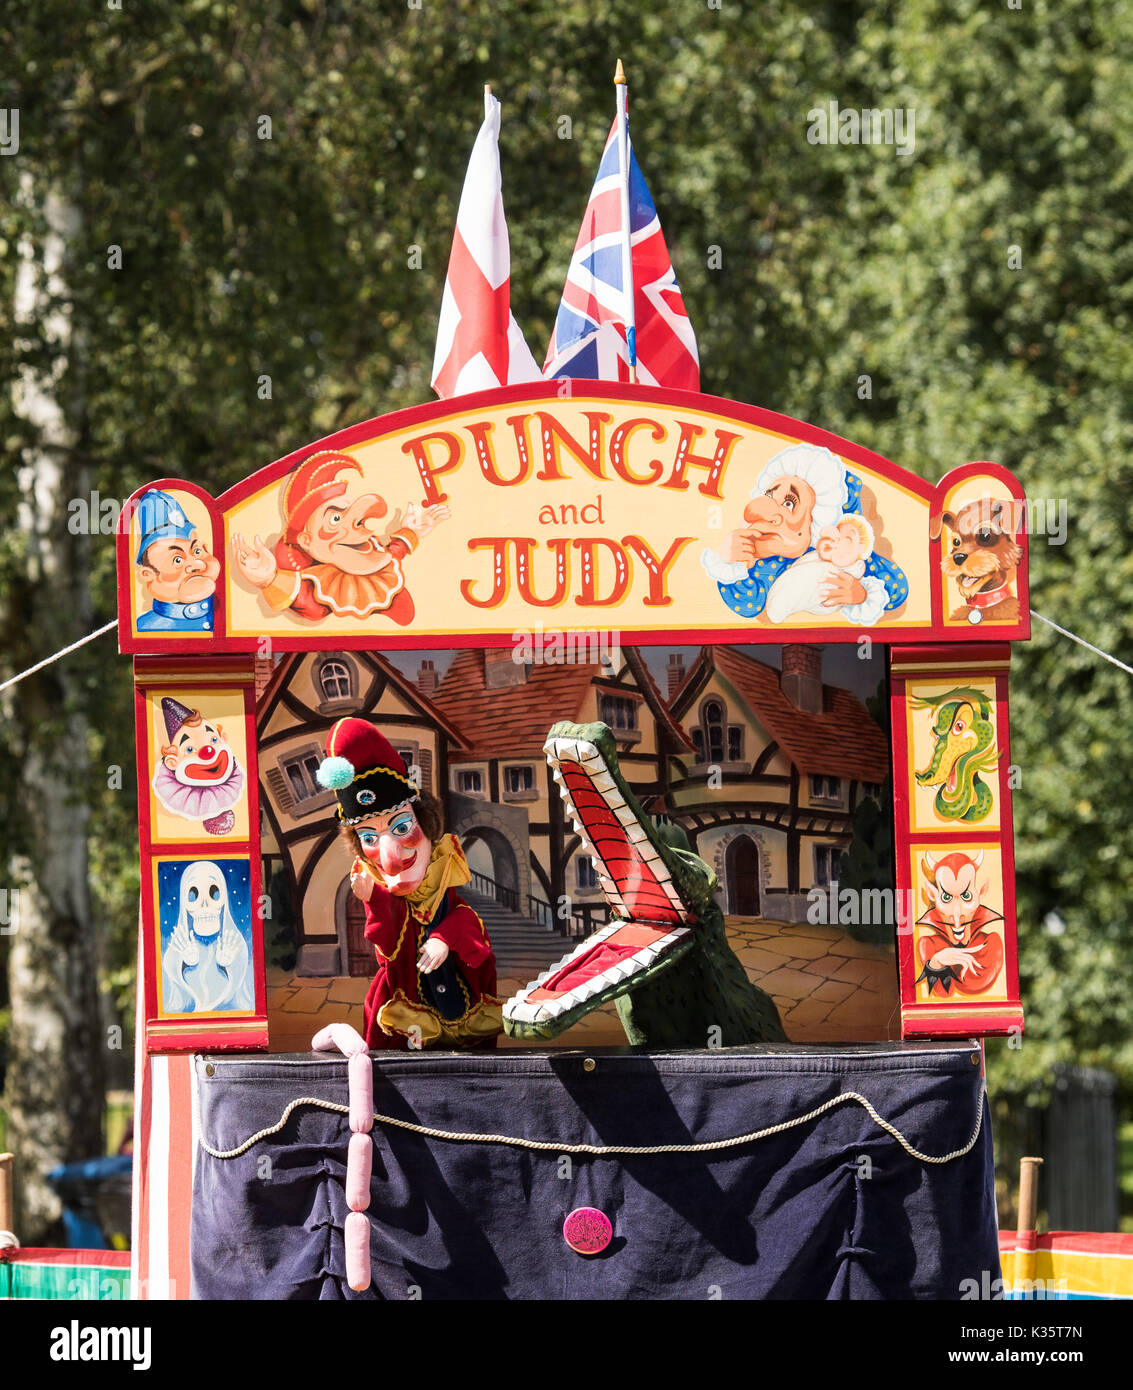 a traditional Punch and Judy show by David Wilde in an English park in the summer at Brentwood, Essex with the Mr Punch, Crocodile and sausages Stock Photo